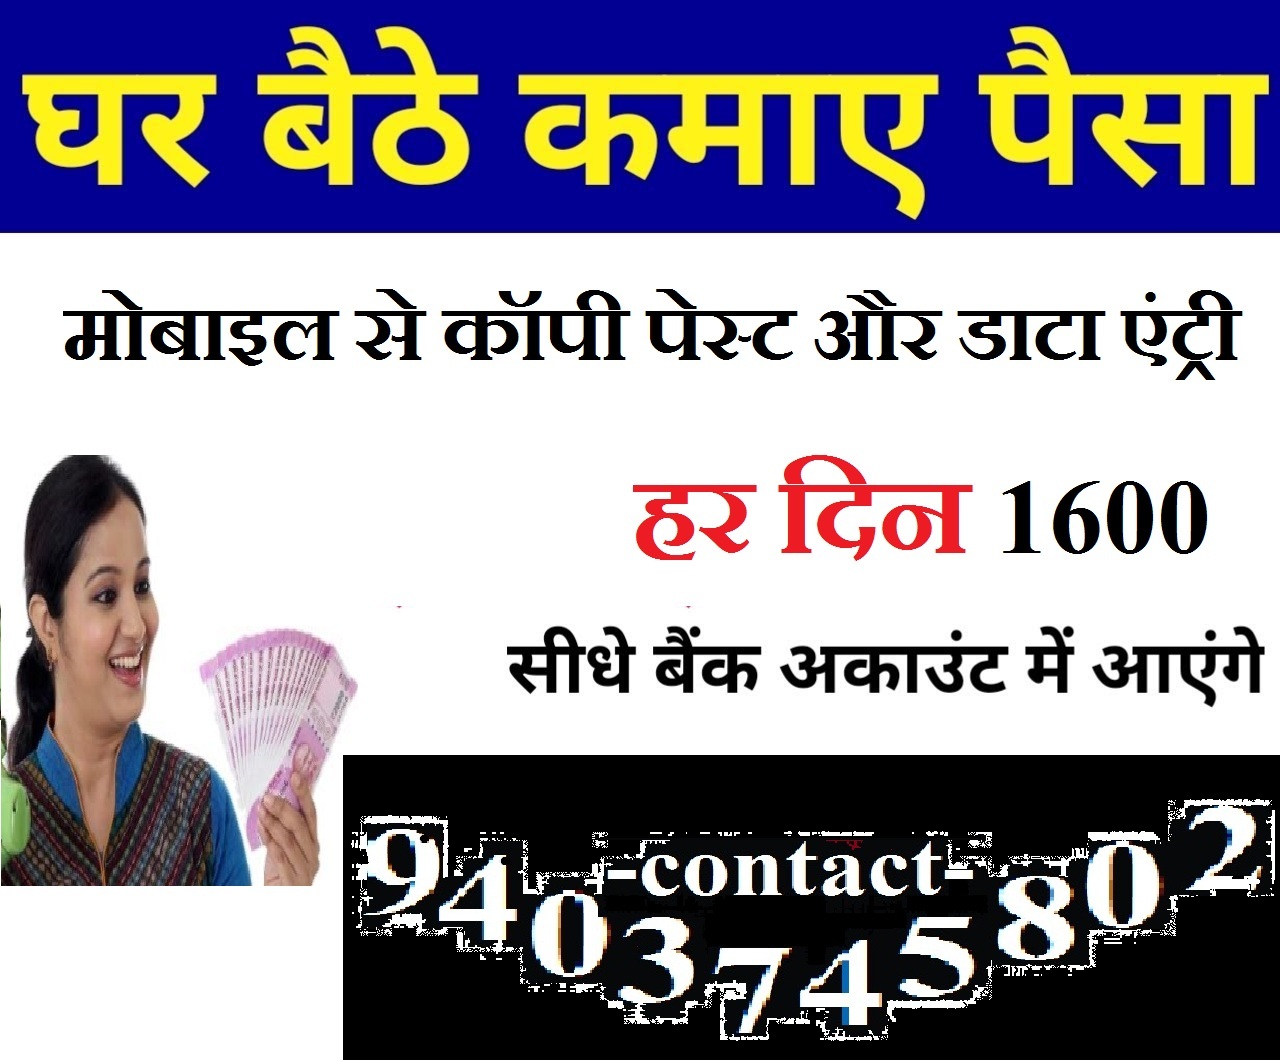 Copy paste sms sending jobJobsOther JobsAll Indiaother